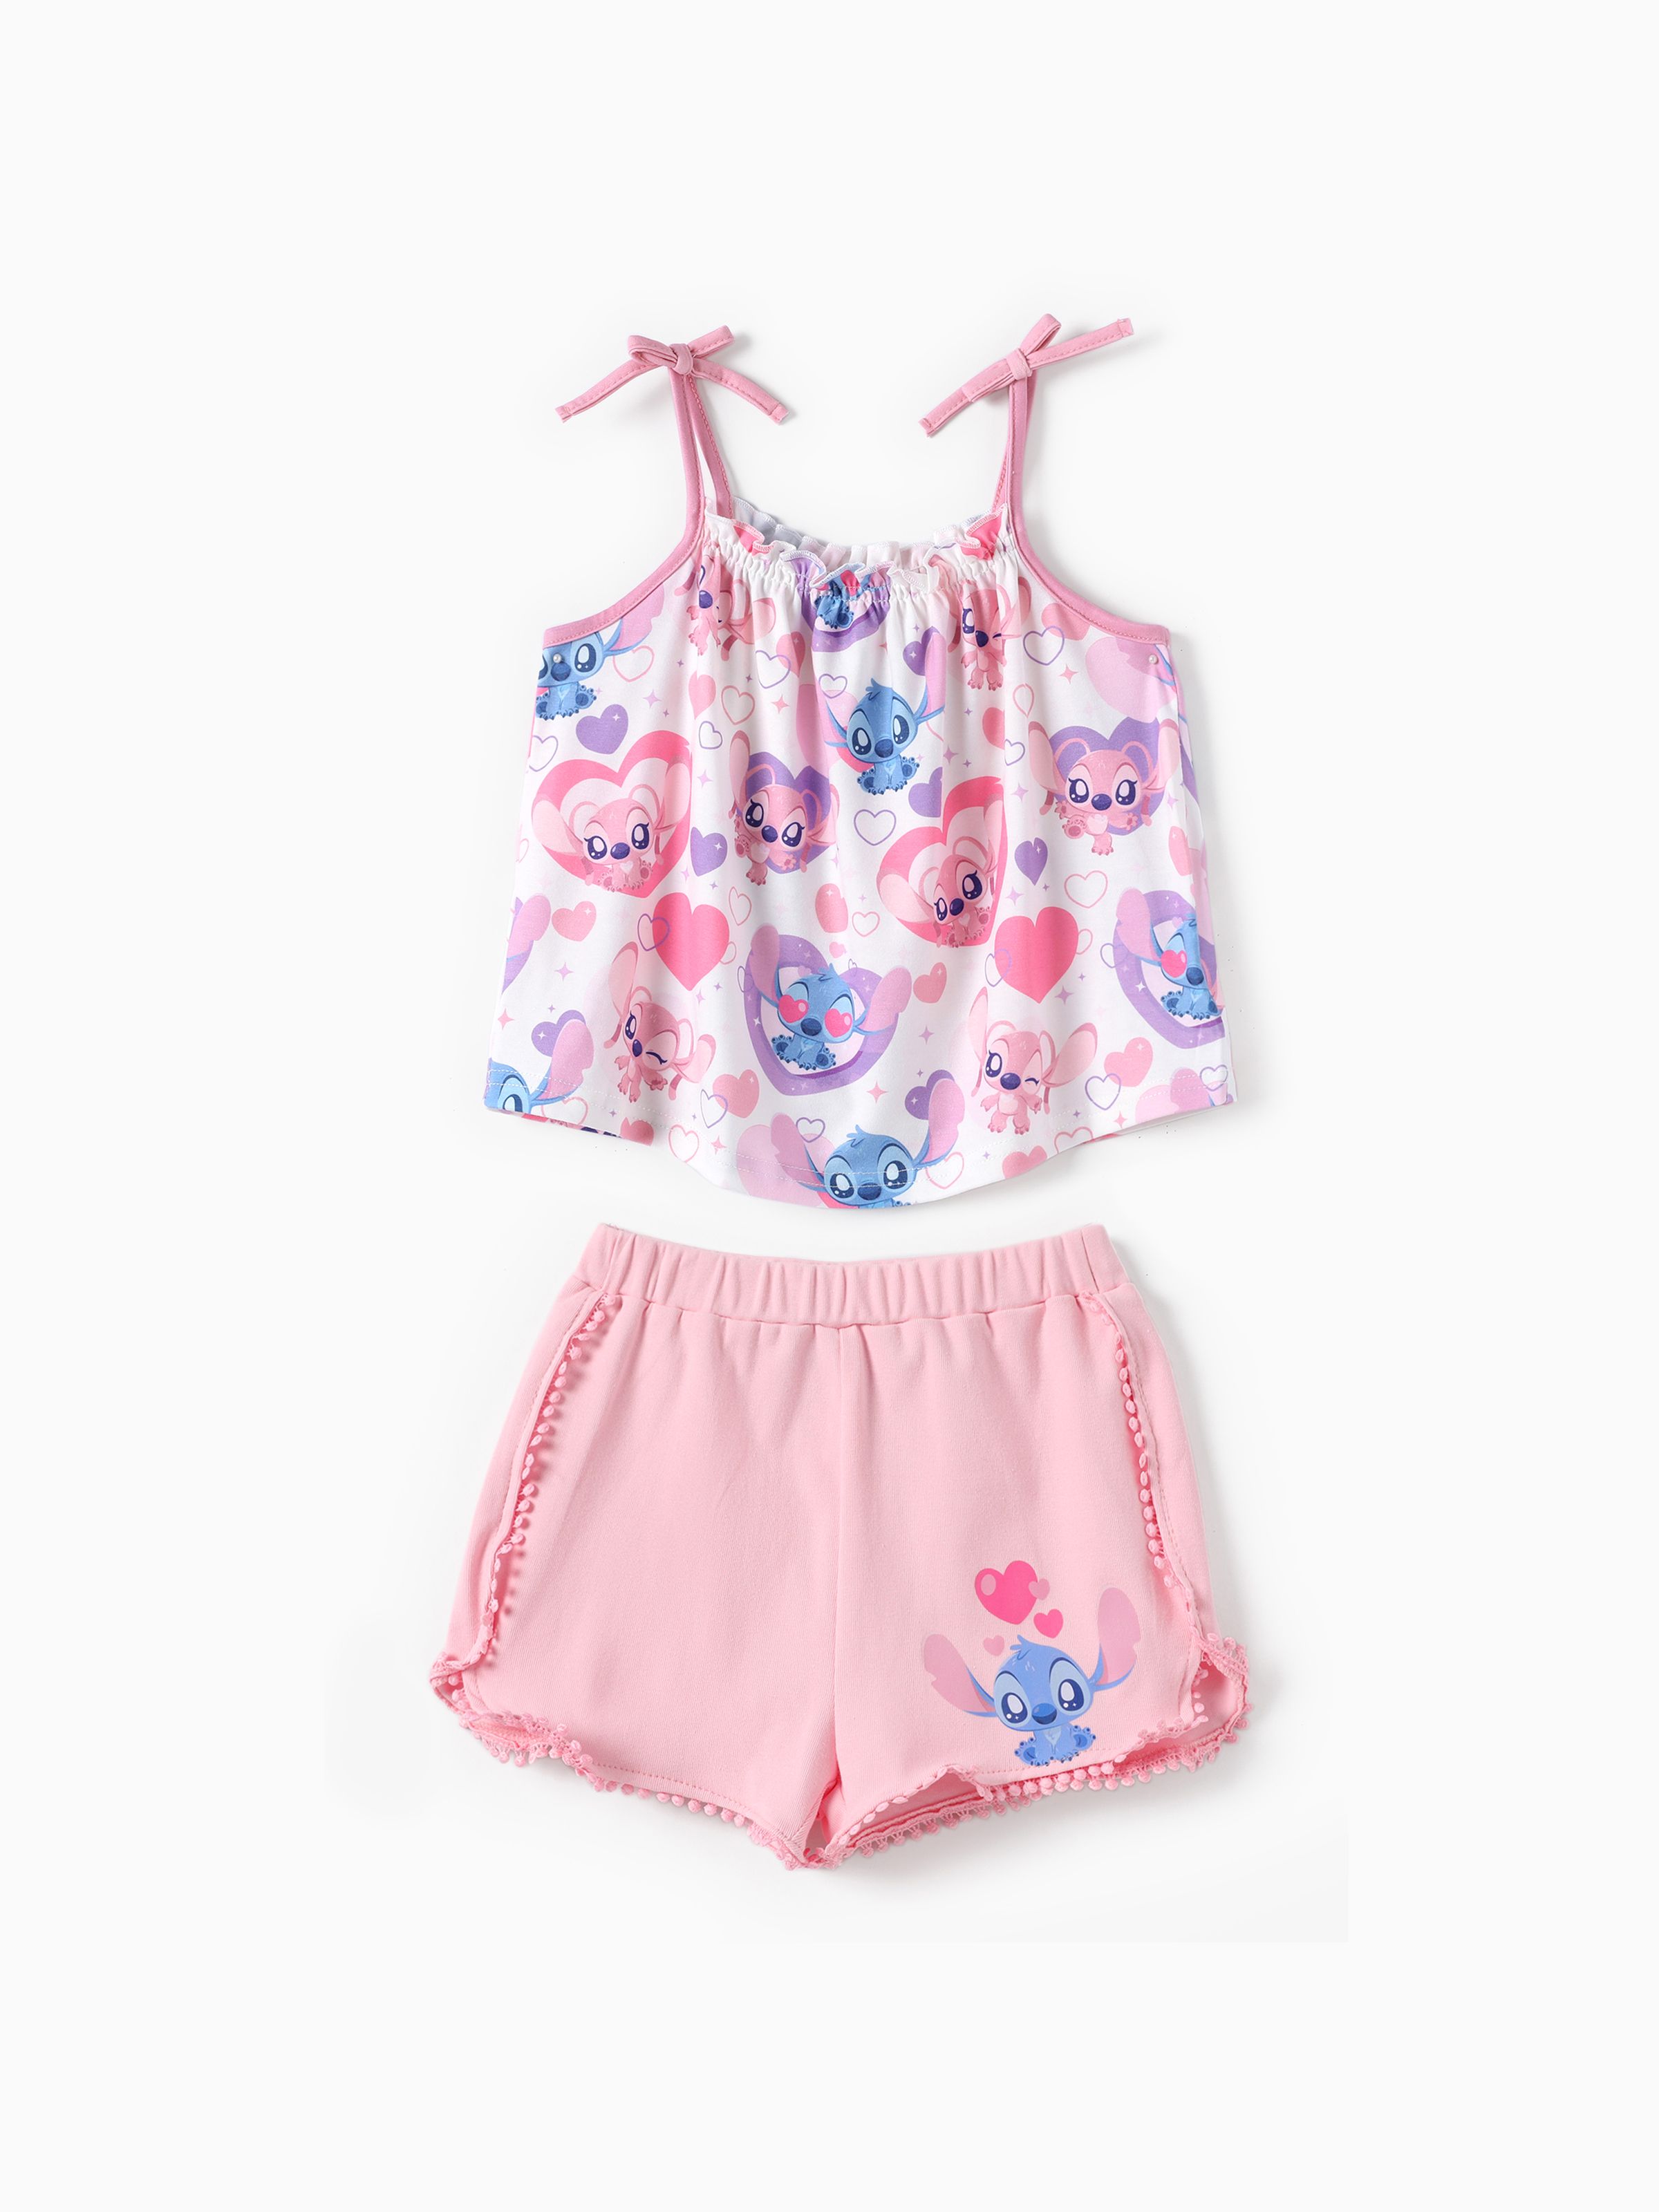 

Disney Stitch Toddler Girls 2pcs Naia™ Lovely Stitch Heart/Palm Leaf Print Shoulder Straps with Bows Top with Shorts Set